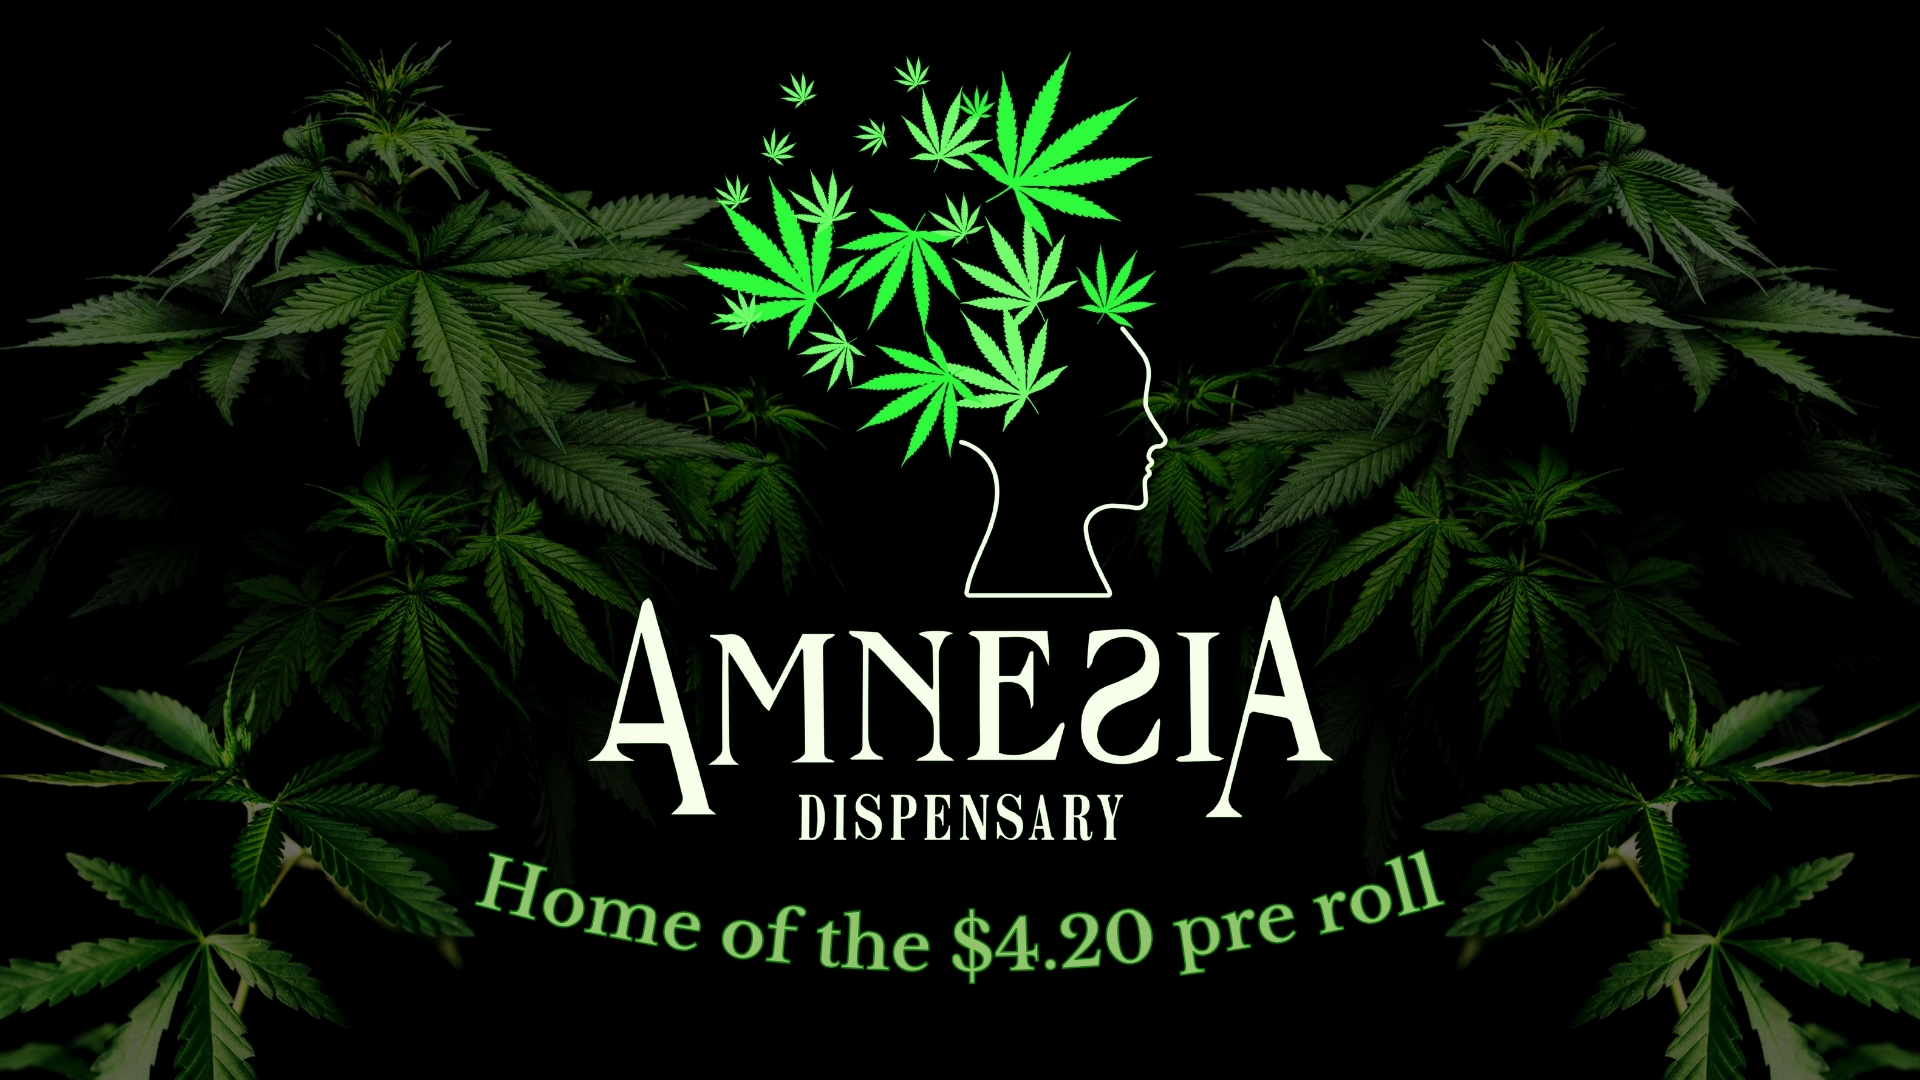 Amnesia Dispensary & Accessories (Med + Rec) Deals | Leafly